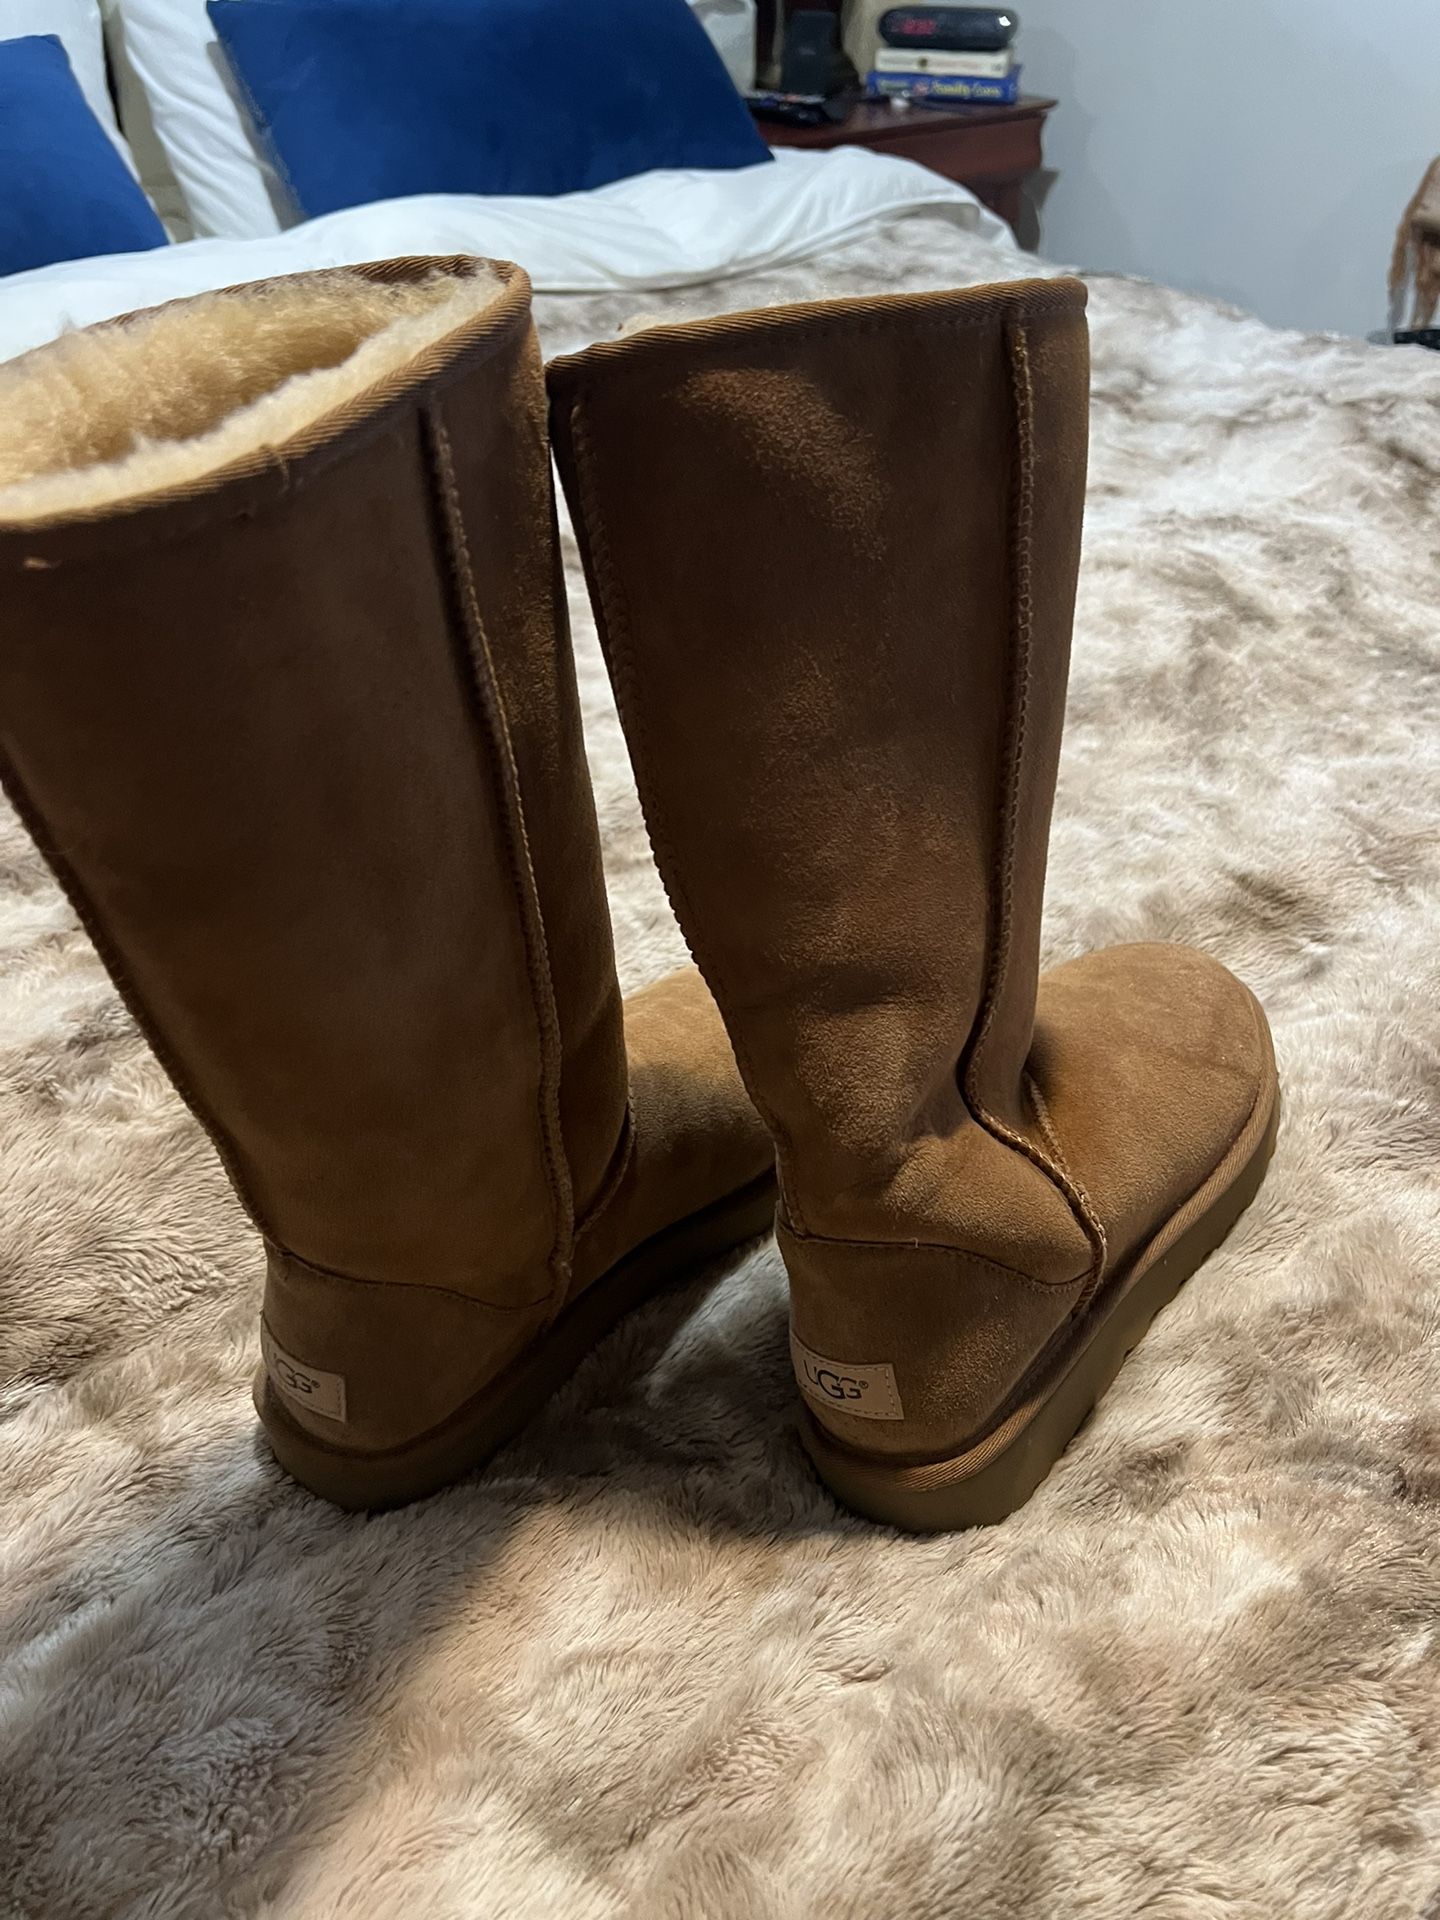 Uggs Boots - Size 9 